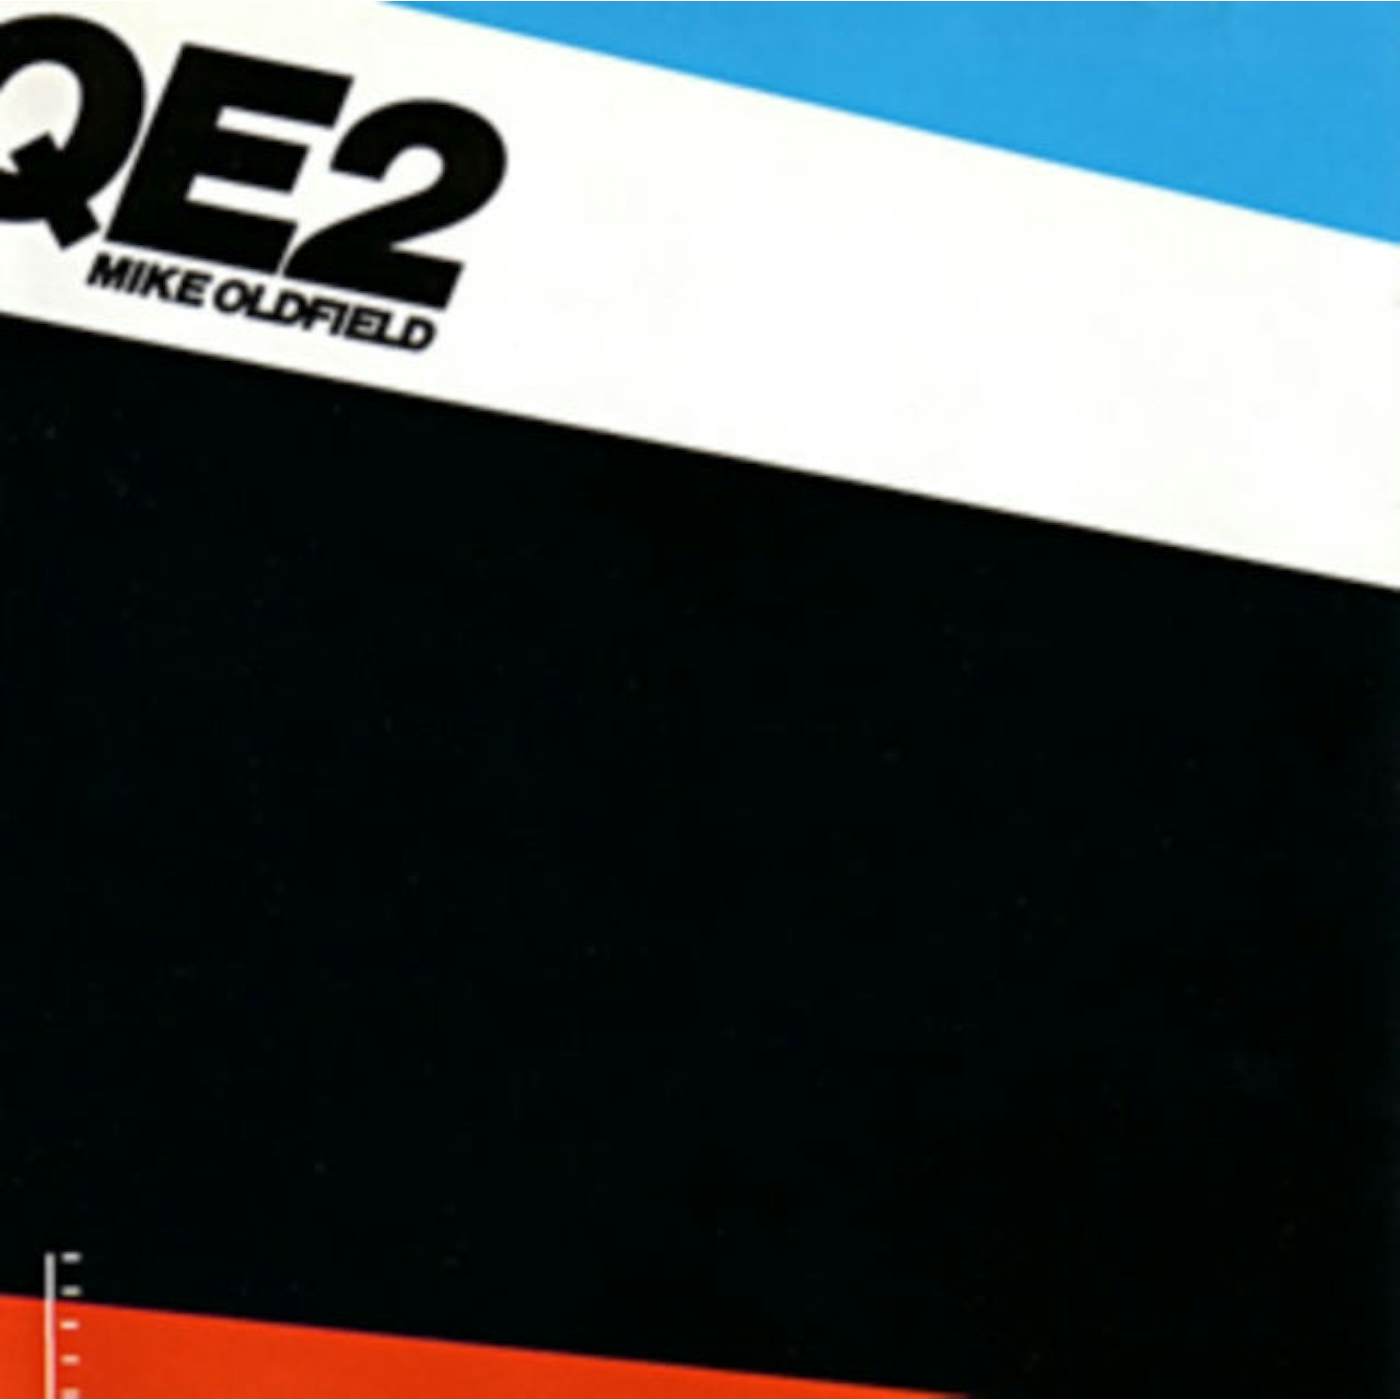 Mike Oldfield CD - Qe2